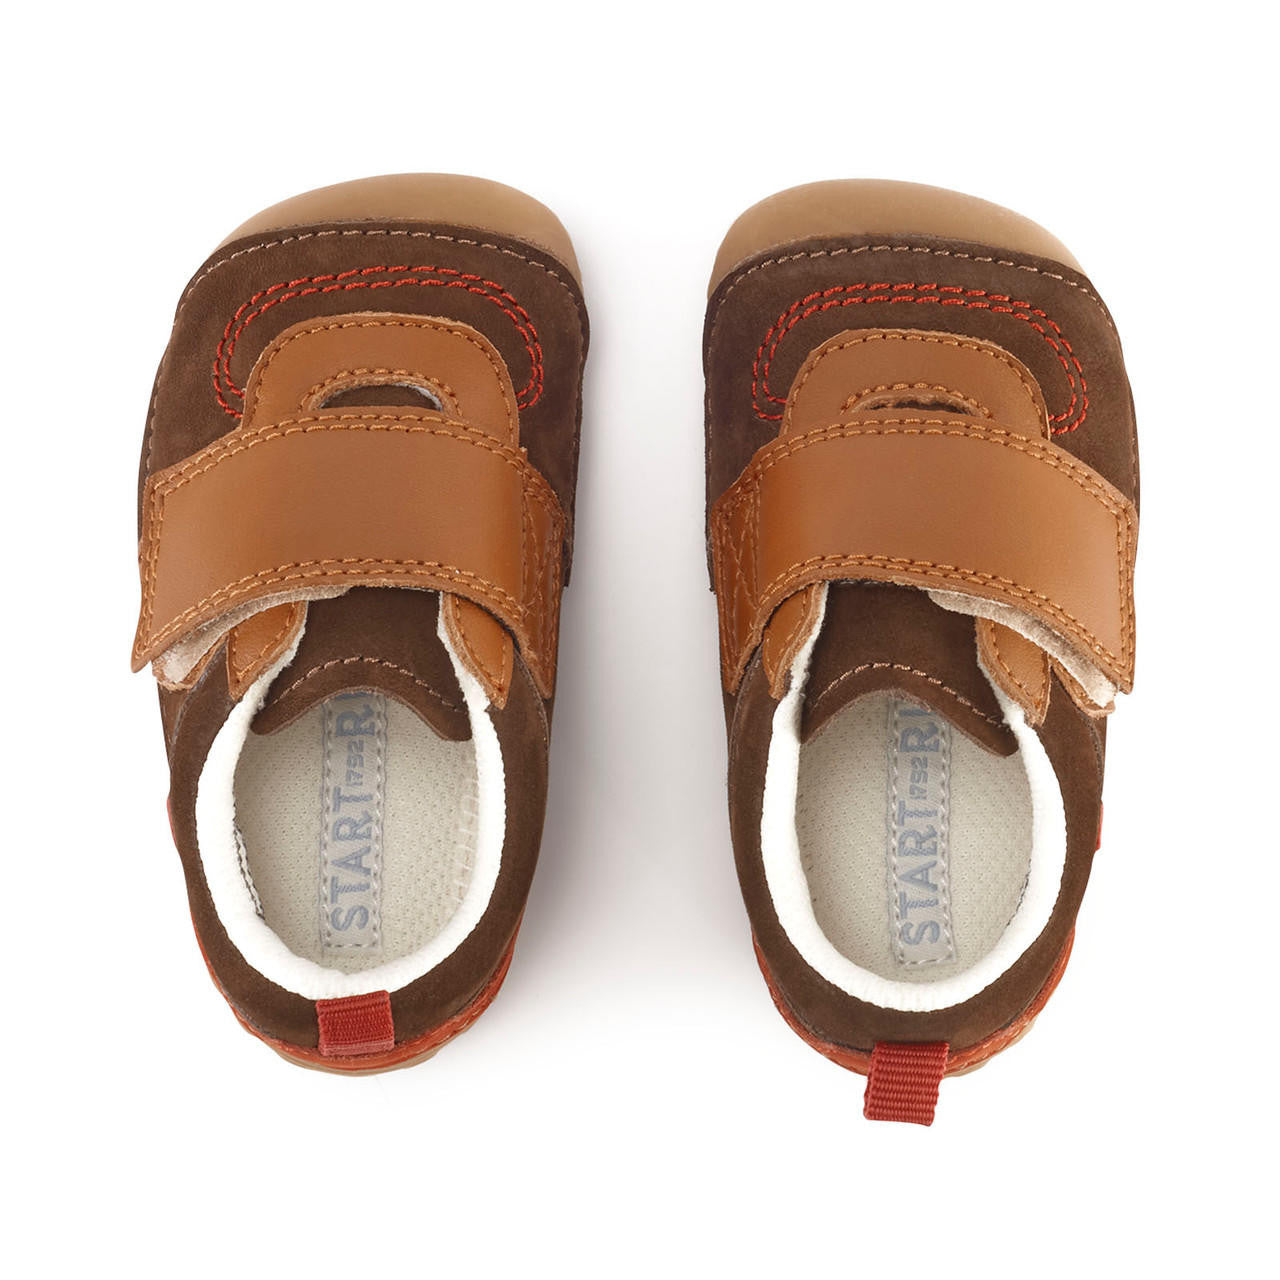 A boys pre walker by Start Rite,style Shuffle, in Brown Nubuck and Tan leather with single velcro fastening. Above view.